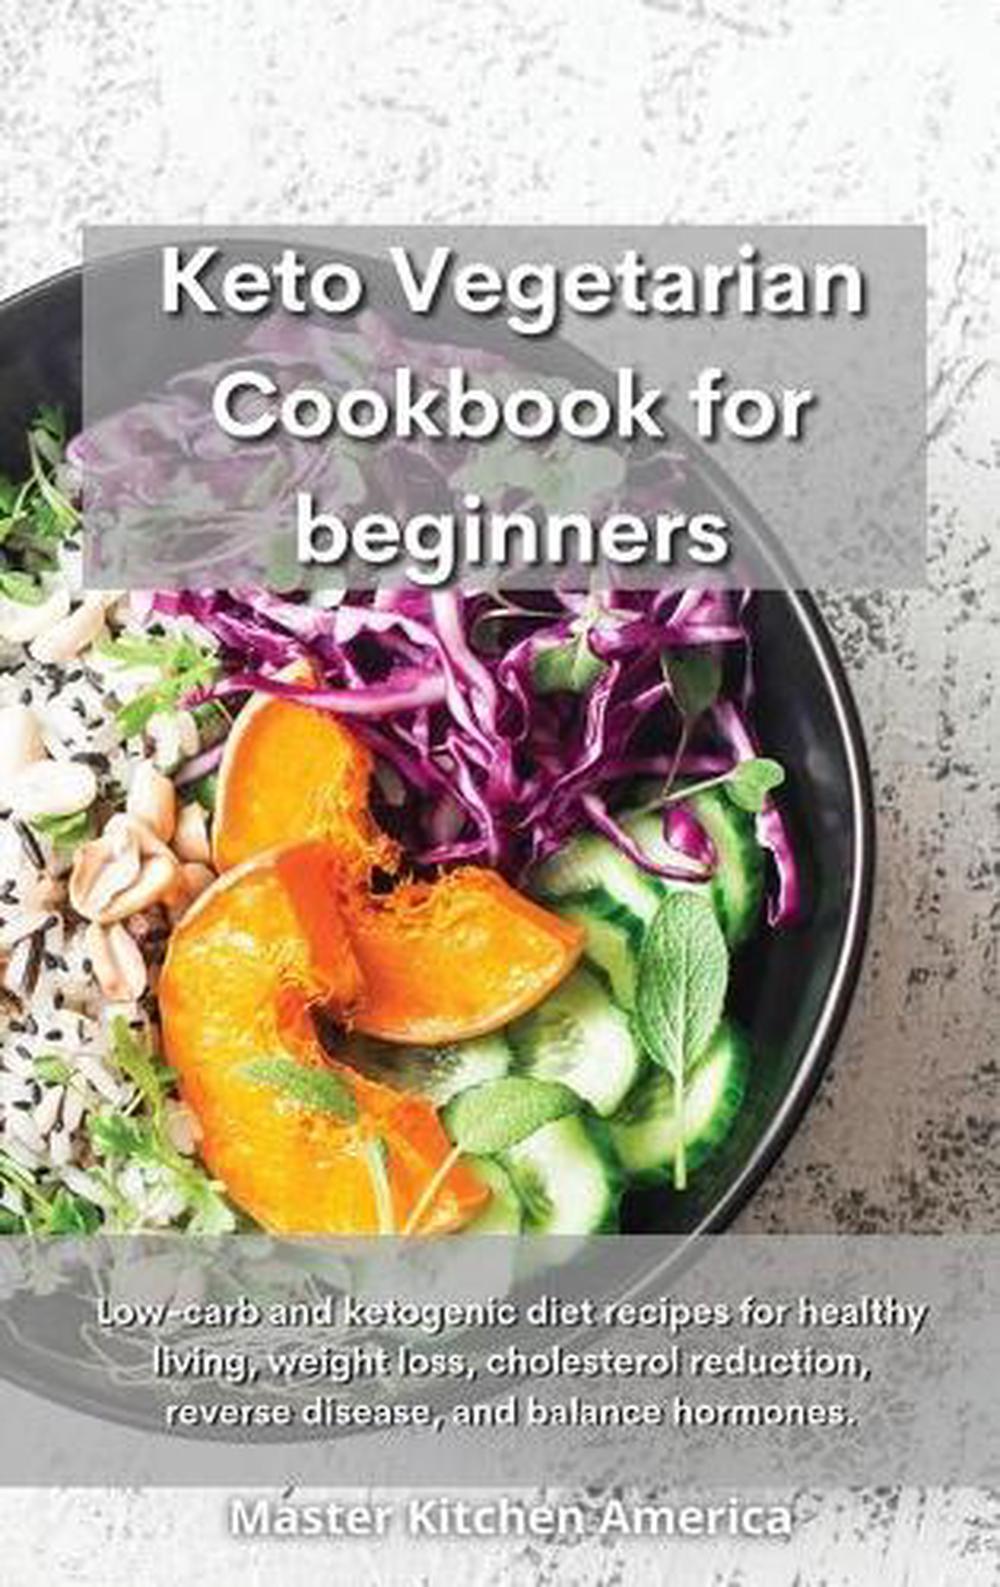 Keto Vegetarian Cookbook for Beginners by Master Kitchen ...